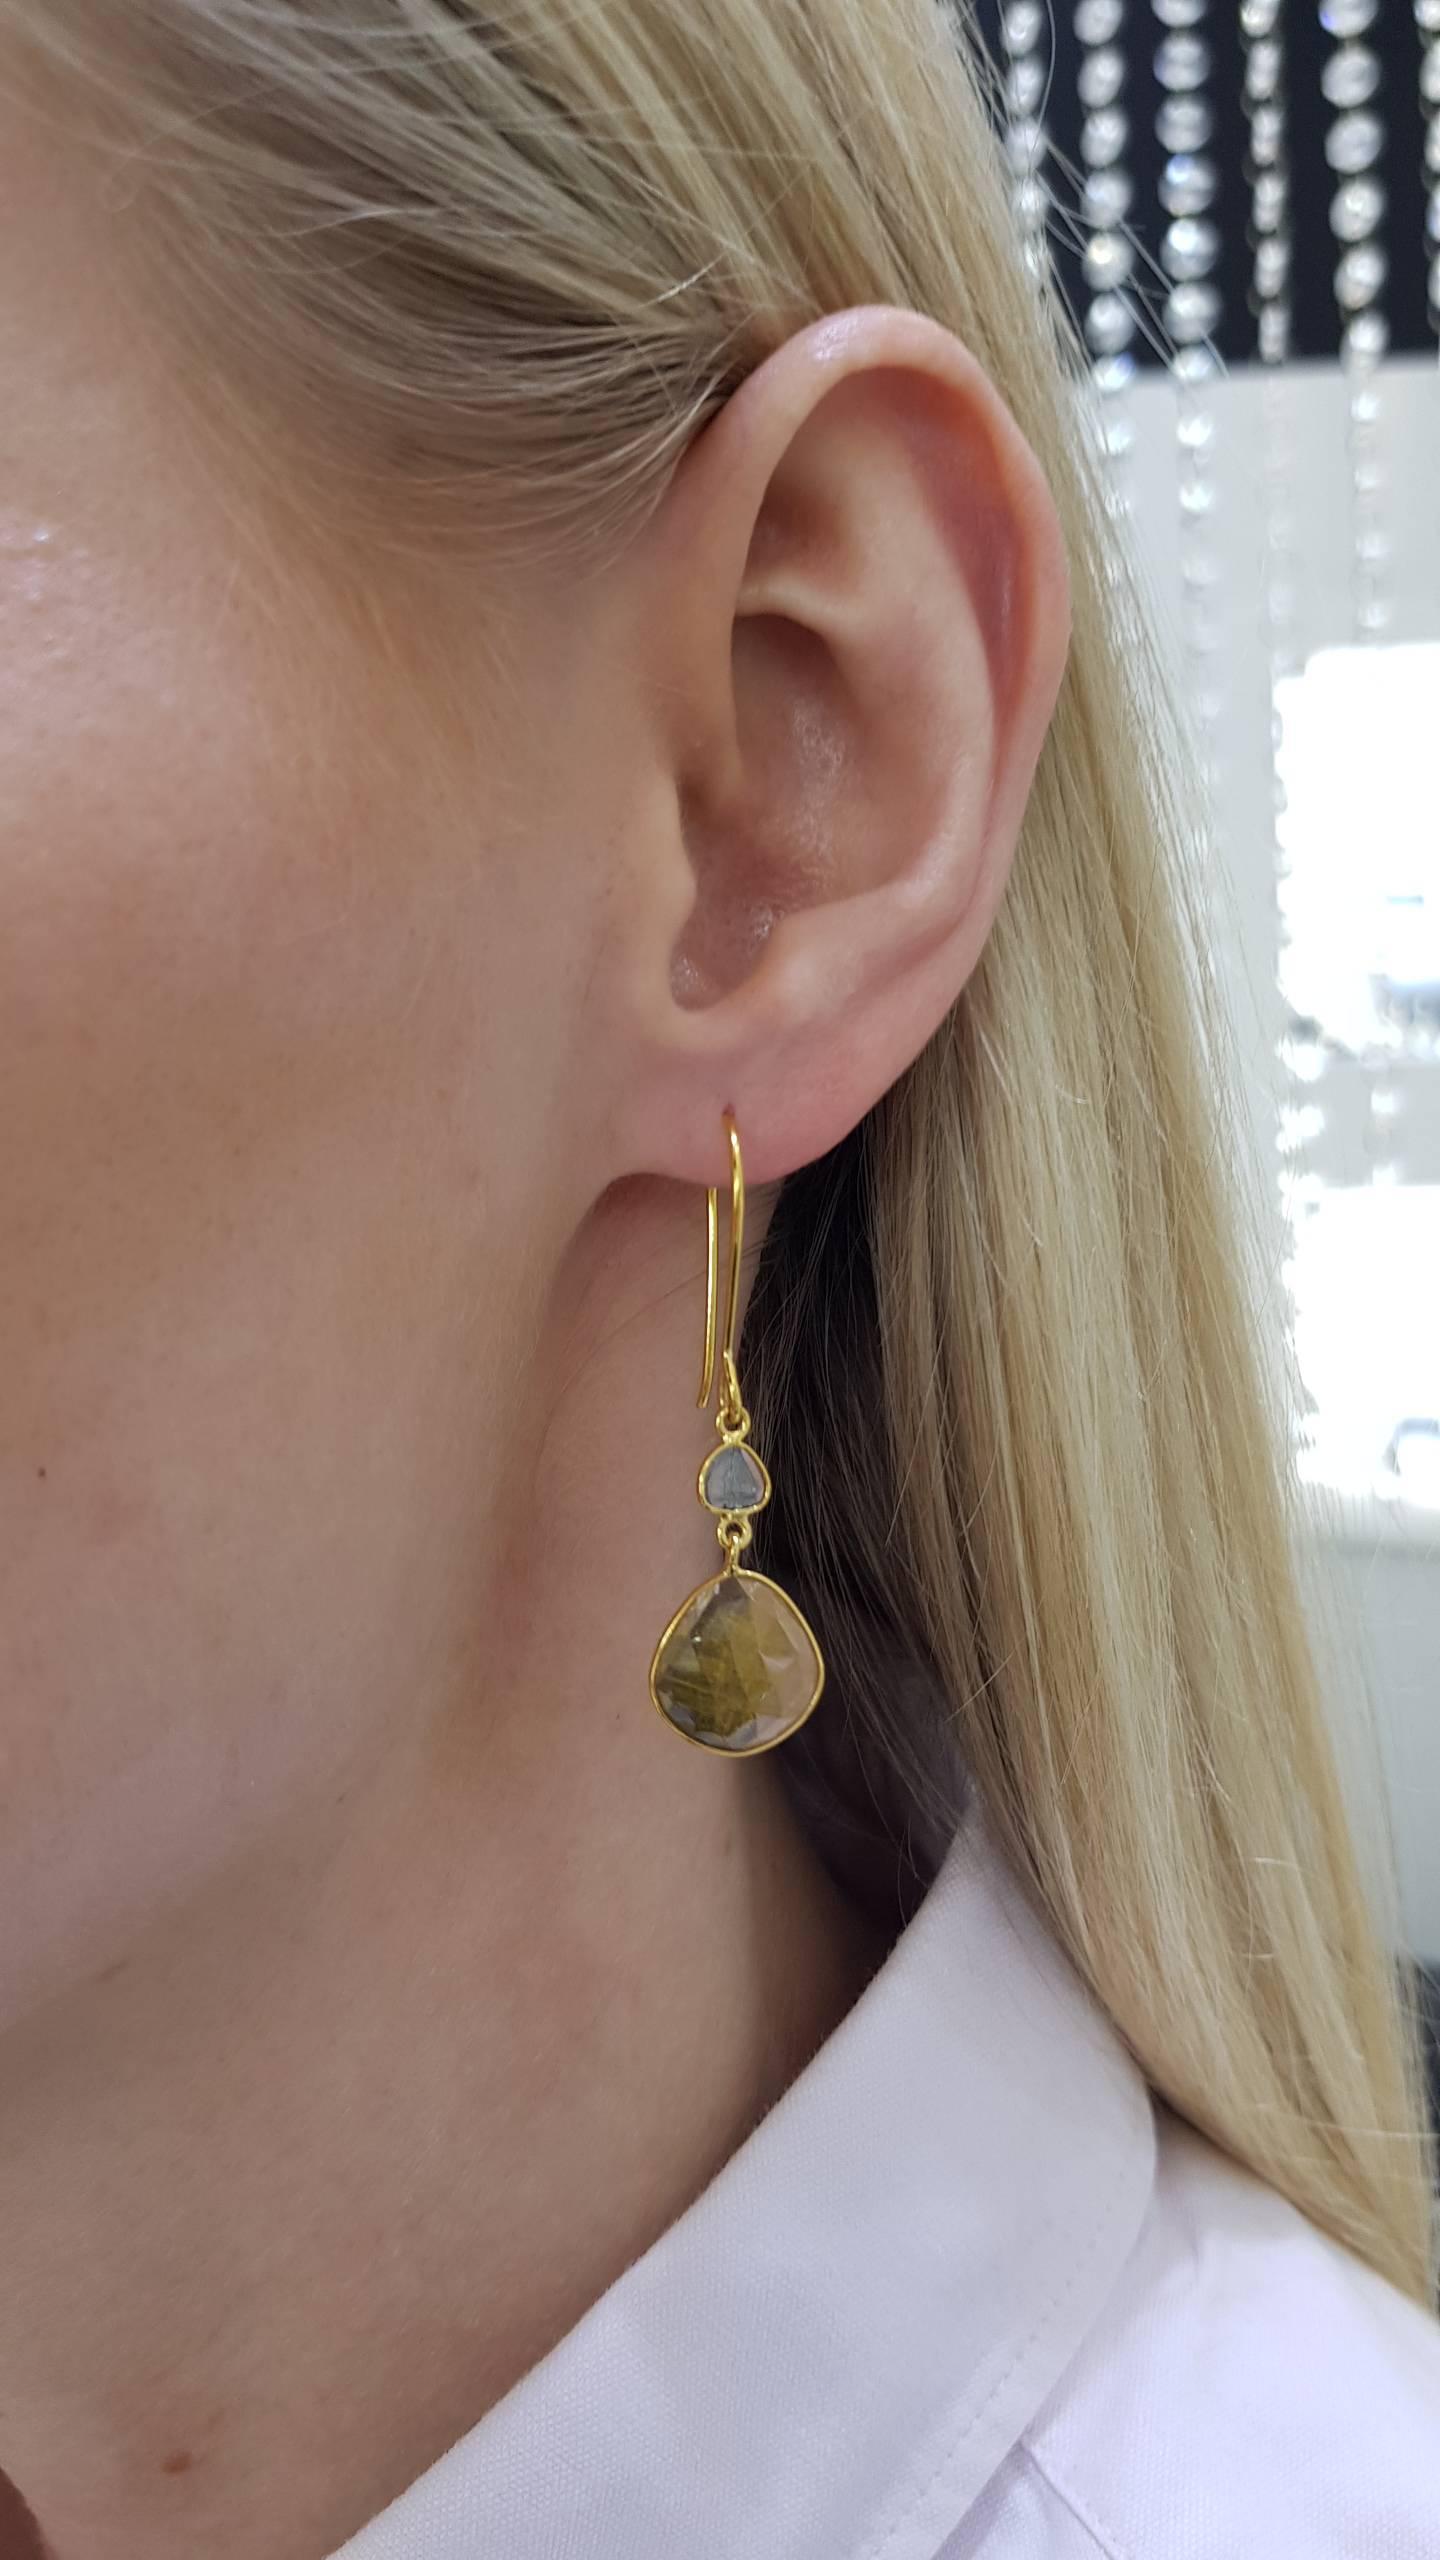 These Gorgeous 9.25 Carat Rose Cut Yellow Sapphire Earrings from the Artisan Collection feature 0.22 Carat in two Diamond slices set in 18 Karat Yellow Gold. Each piece is hand made with a unique shaped precious stones. These elegant and lightweight